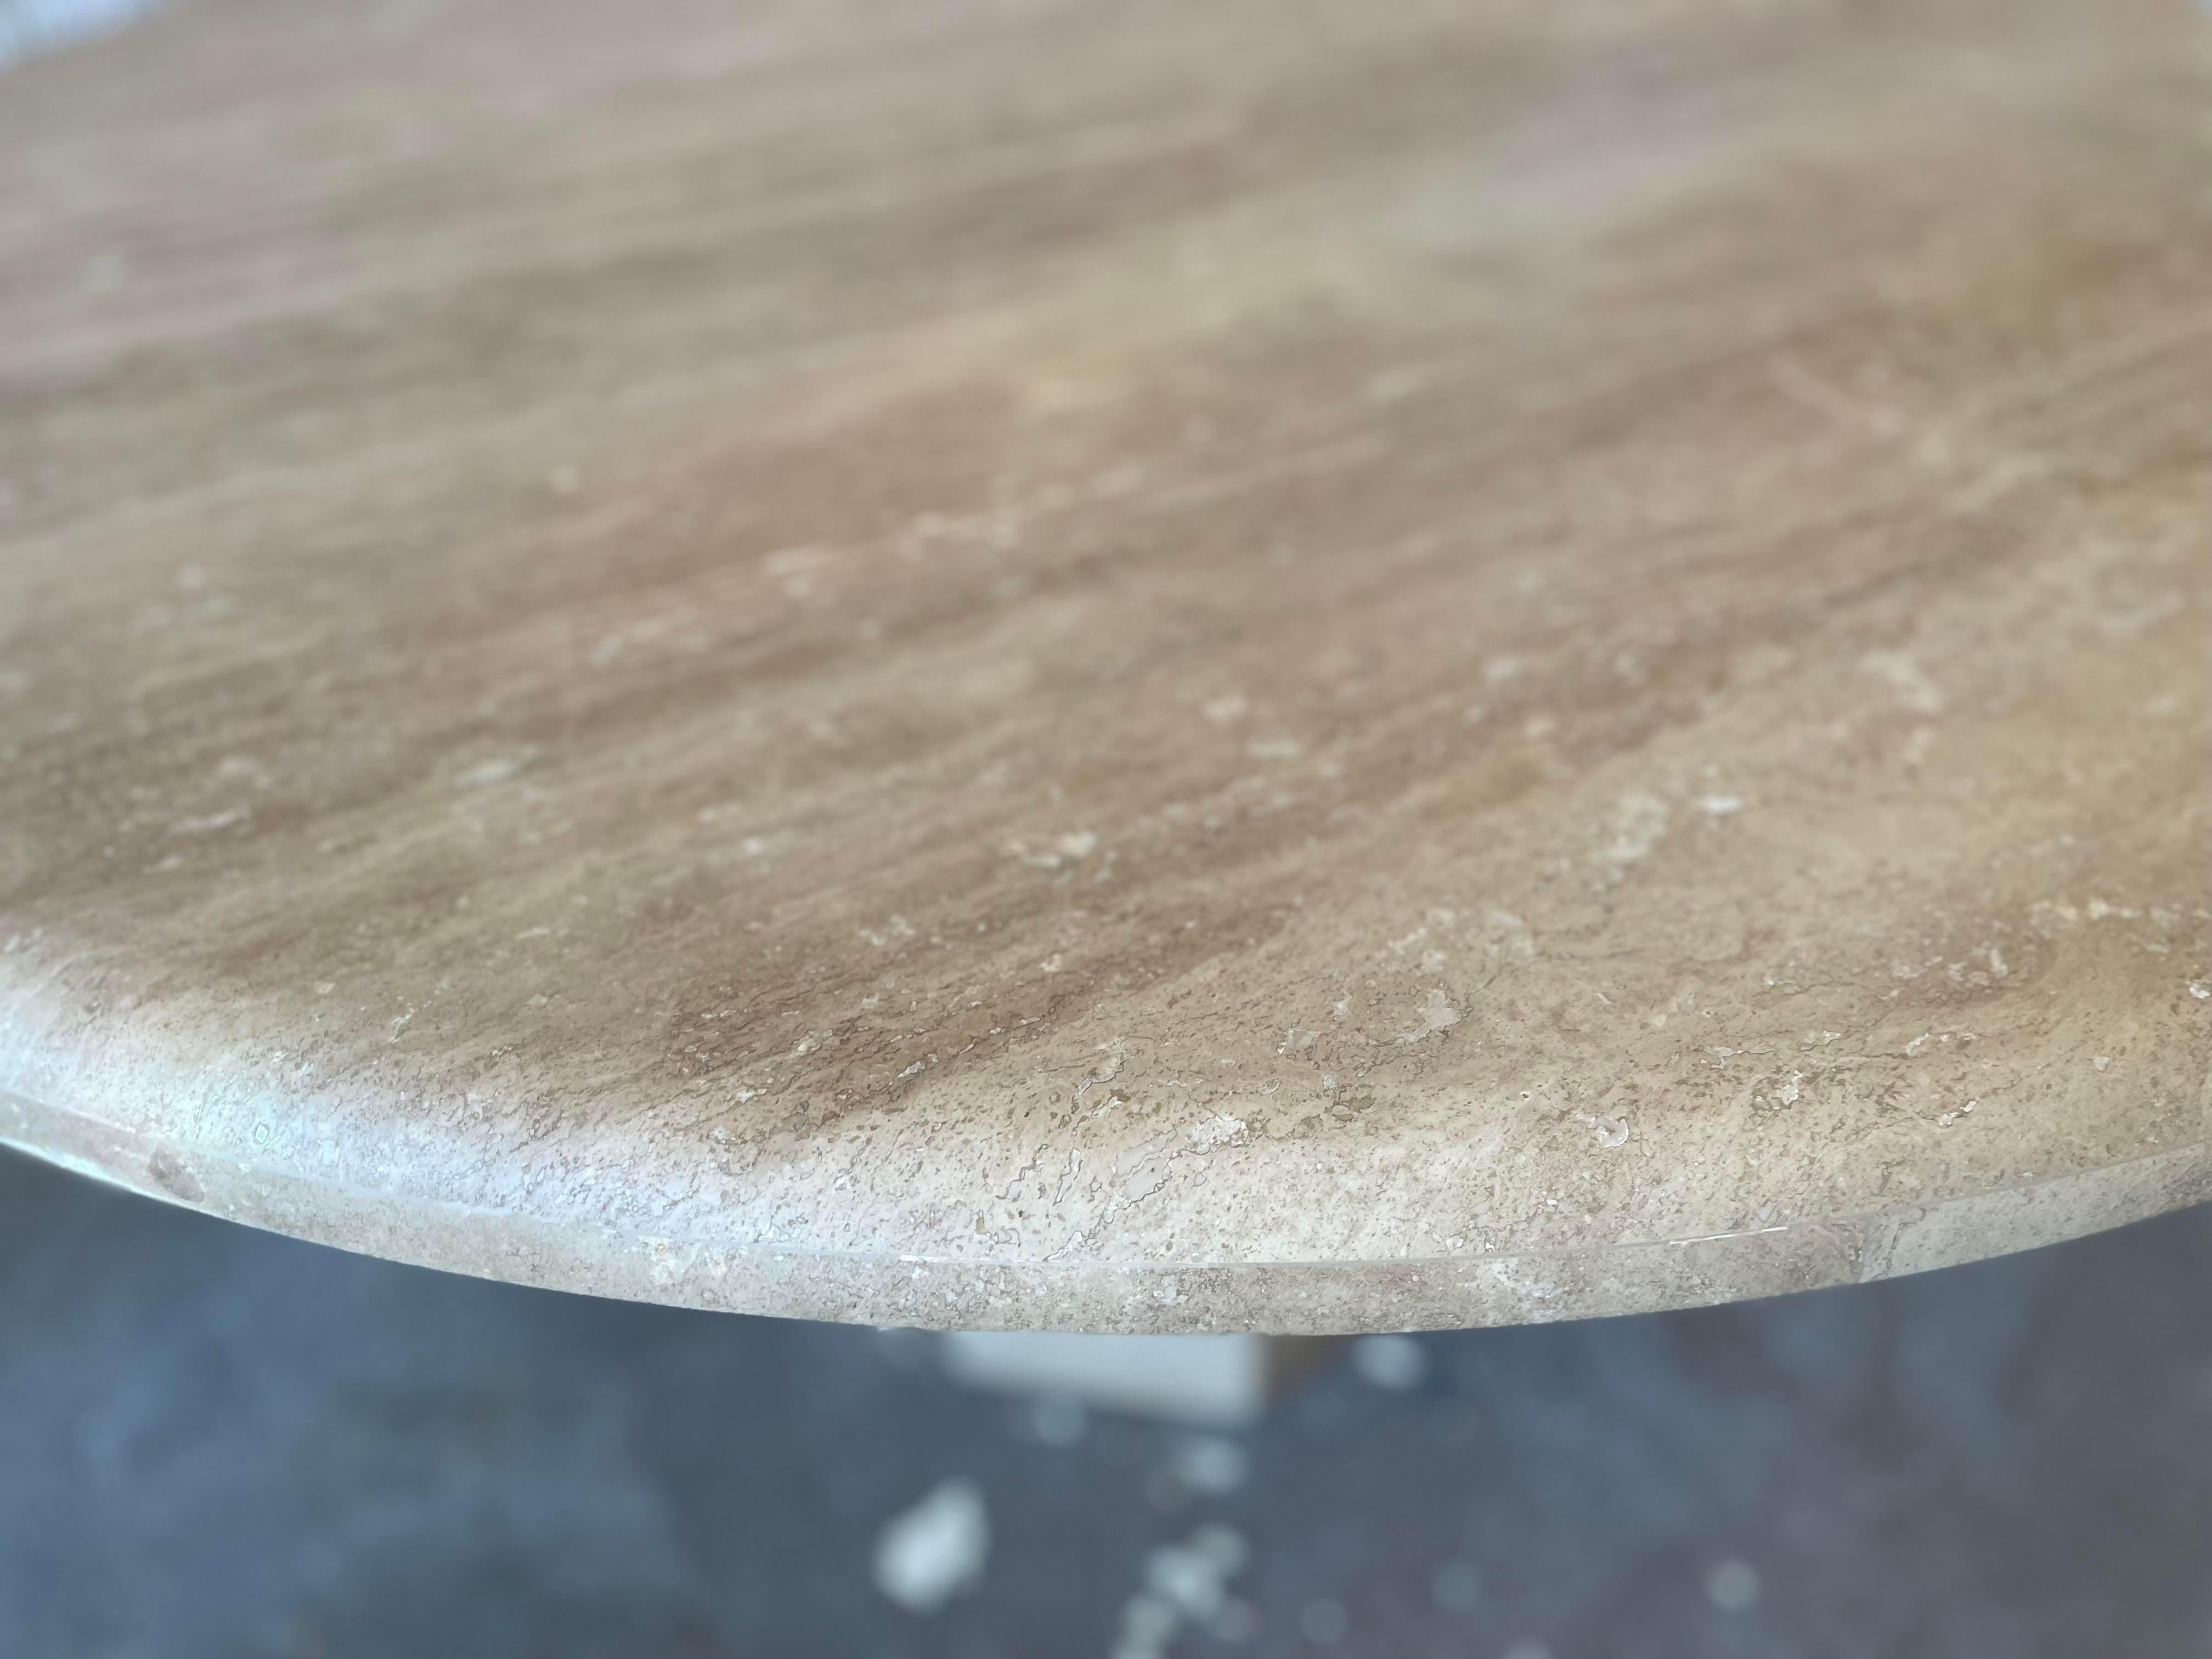 Oh I love having the old lacquer removed to reveal a beautiful matte honed texture. This technique modernizes vintage tables and makes them look brand new. This table is walnut travertine (more brown than typical ivory travertine).

The table seats